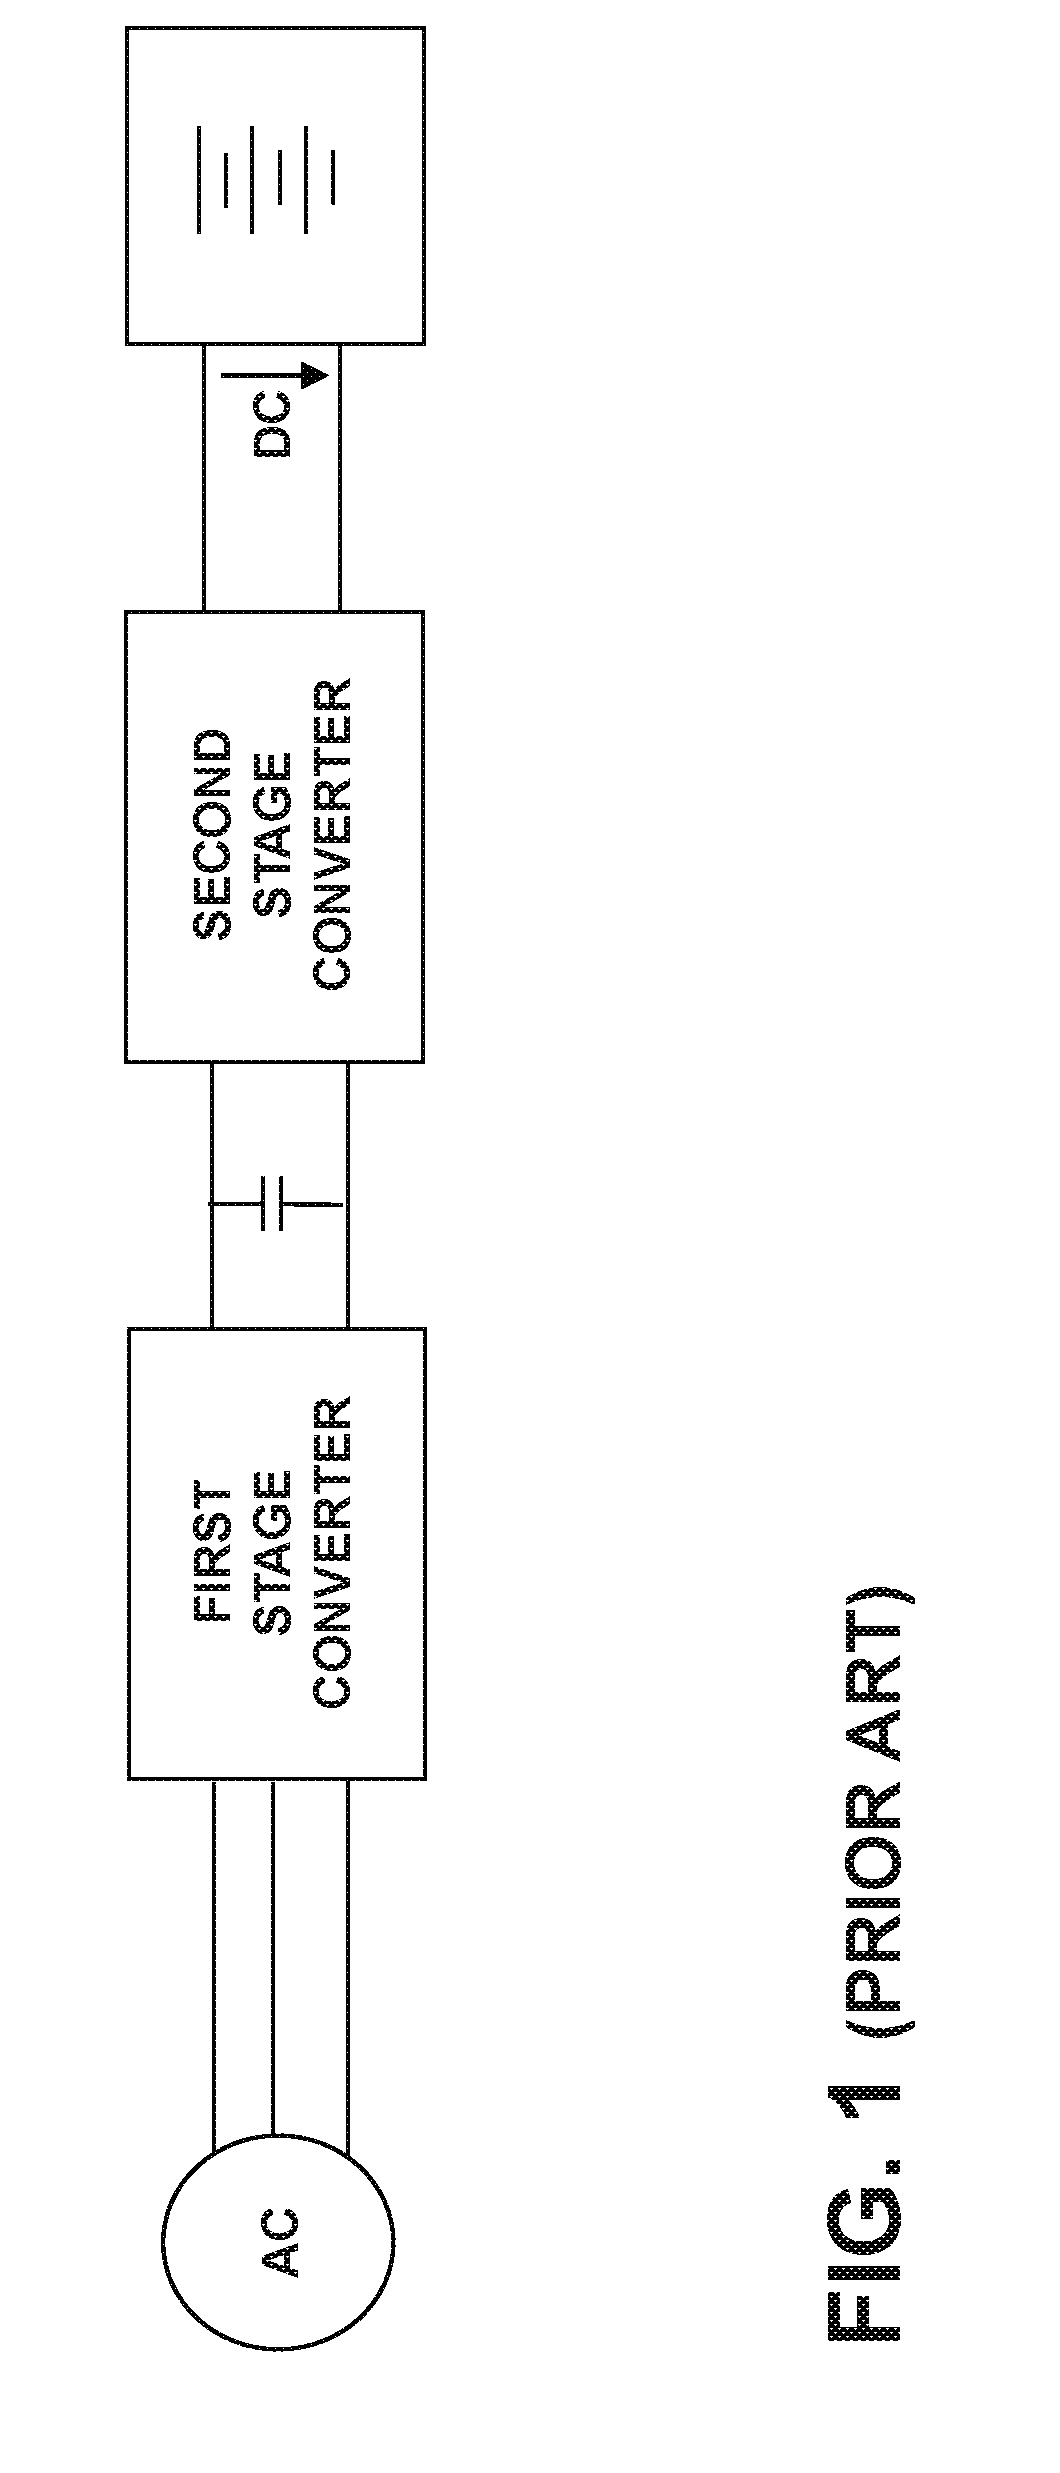 Dual active bridge control circuit for use with unbalanced grid voltages